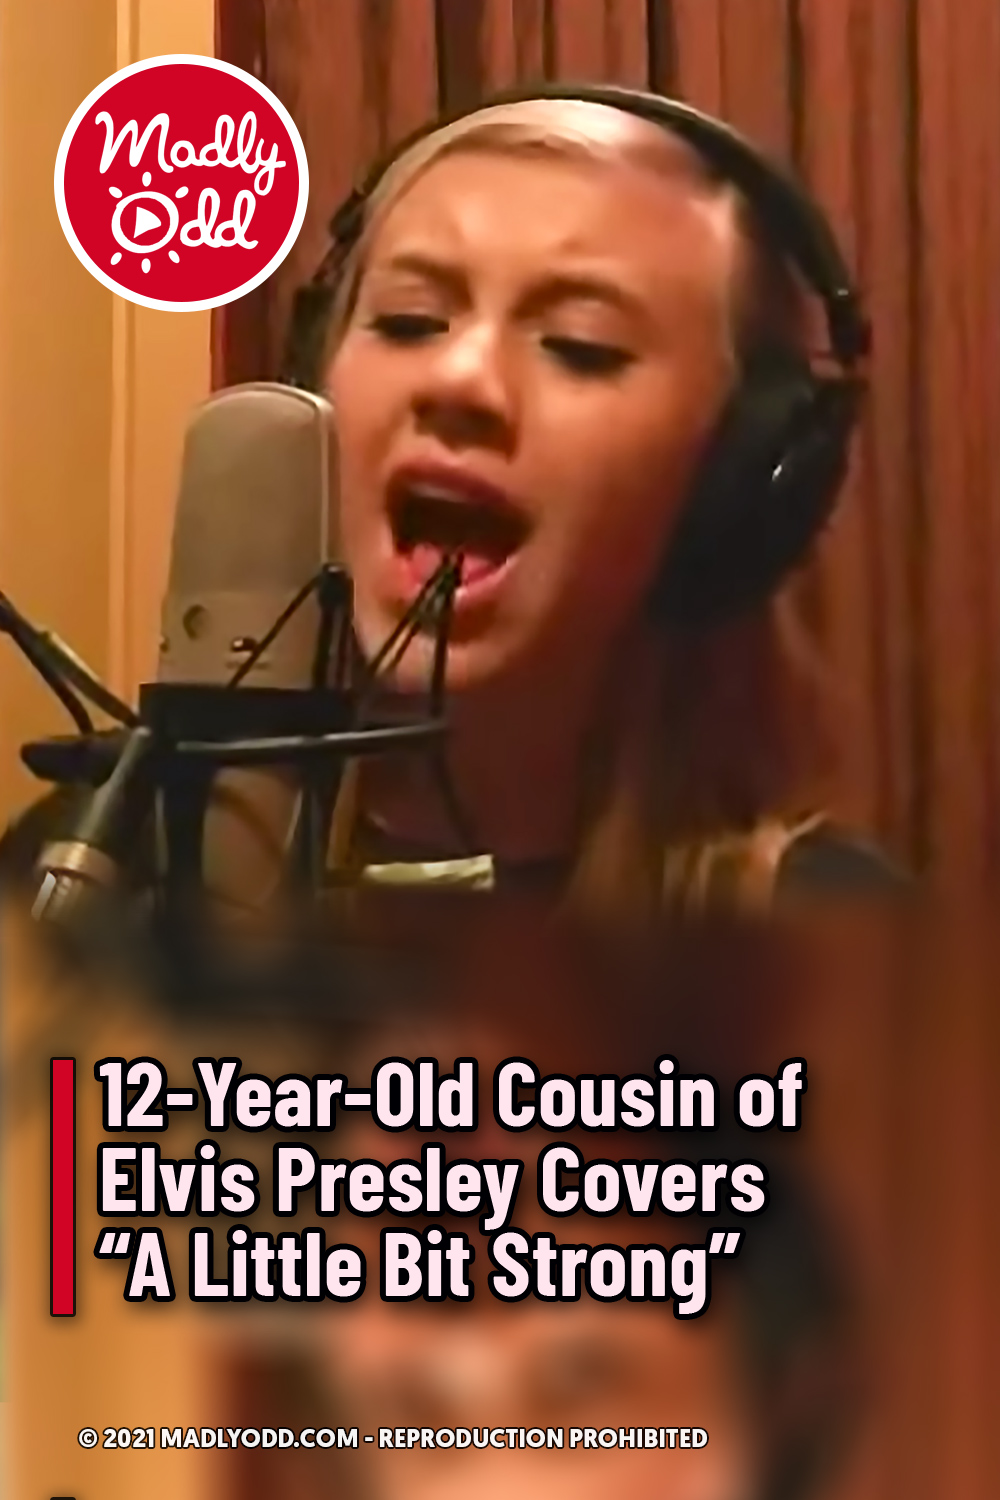 12-Year-Old Cousin of Elvis Presley Covers “A Little Bit Strong”